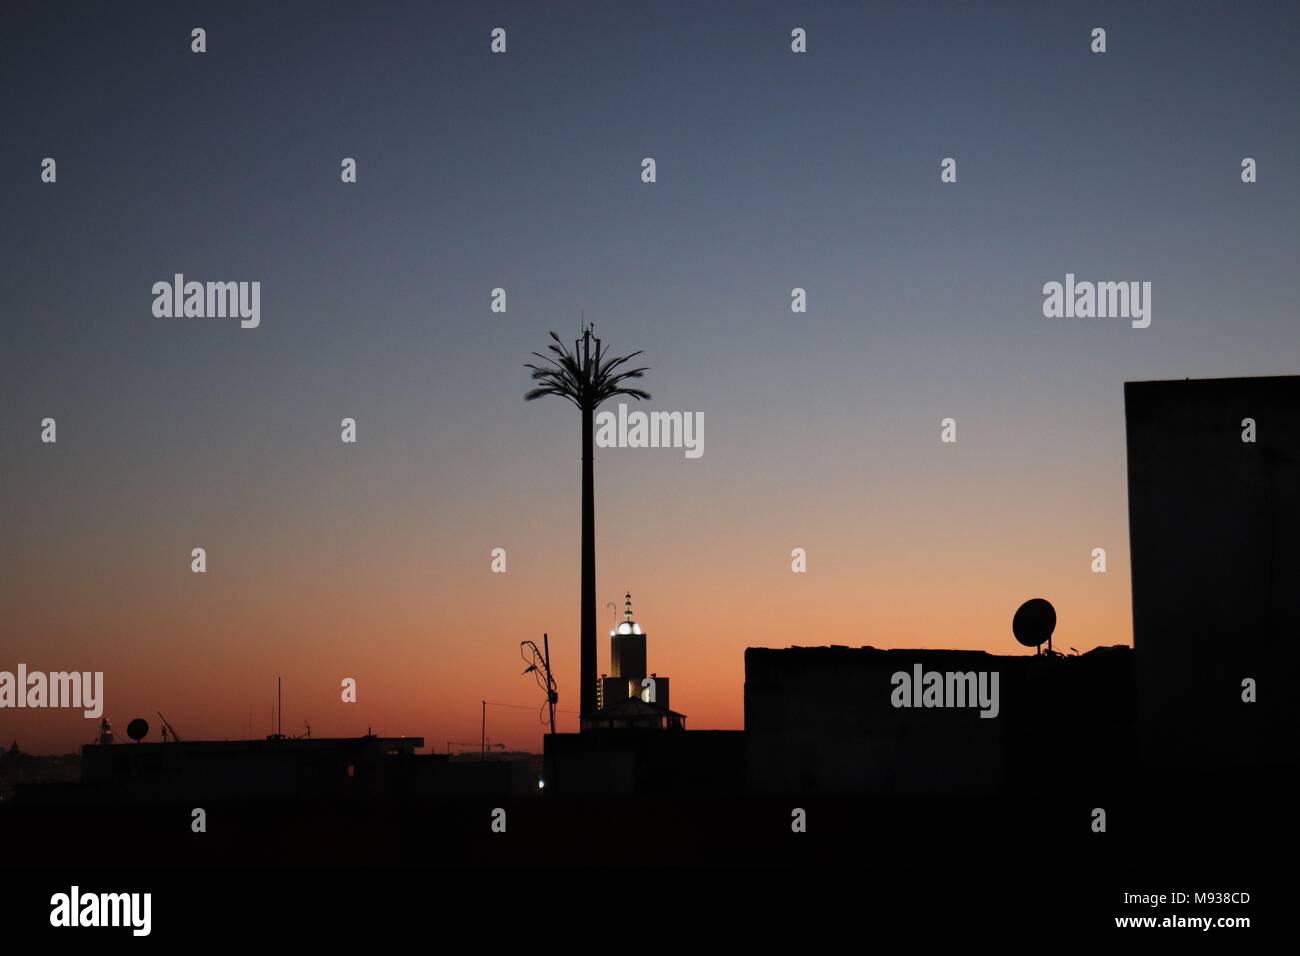 Mobile Phone Communication Mast Disguised as a Palm Tree, and a Mosque Silhouetted Against a Dramatic Sunset in Morocco Stock Photo